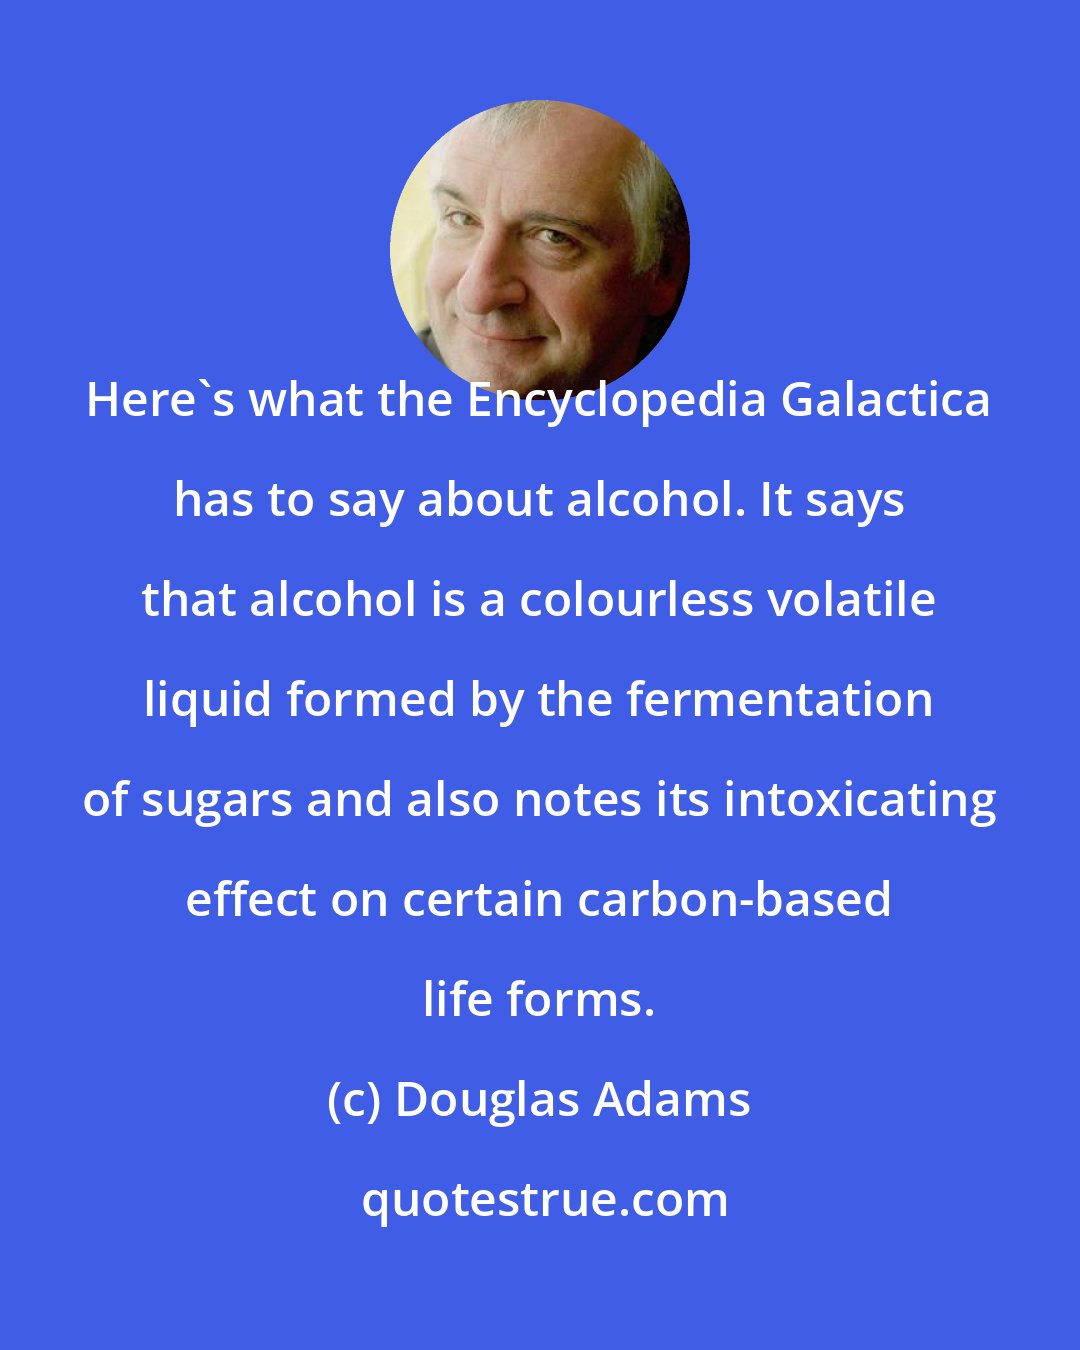 Douglas Adams: Here's what the Encyclopedia Galactica has to say about alcohol. It says that alcohol is a colourless volatile liquid formed by the fermentation of sugars and also notes its intoxicating effect on certain carbon-based life forms.